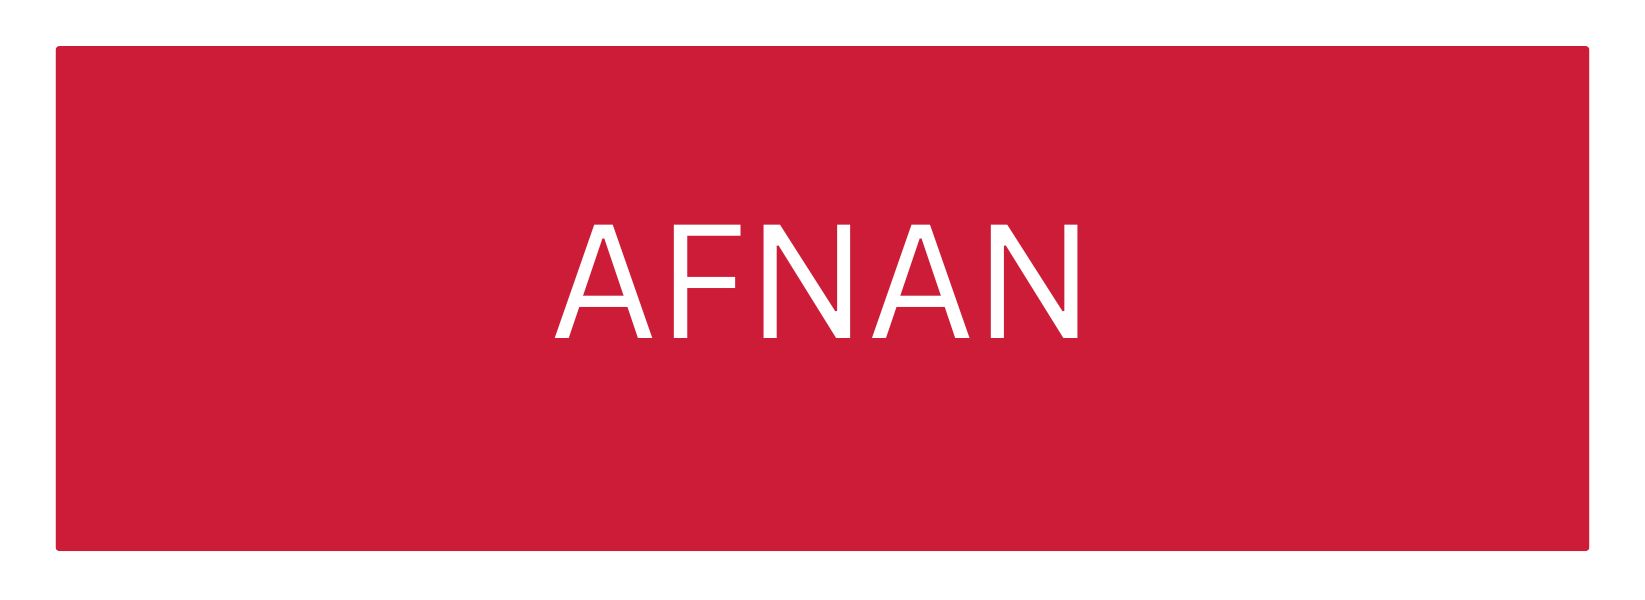 Afnan- 15% off use link below to activate. Expires 6/26/2024